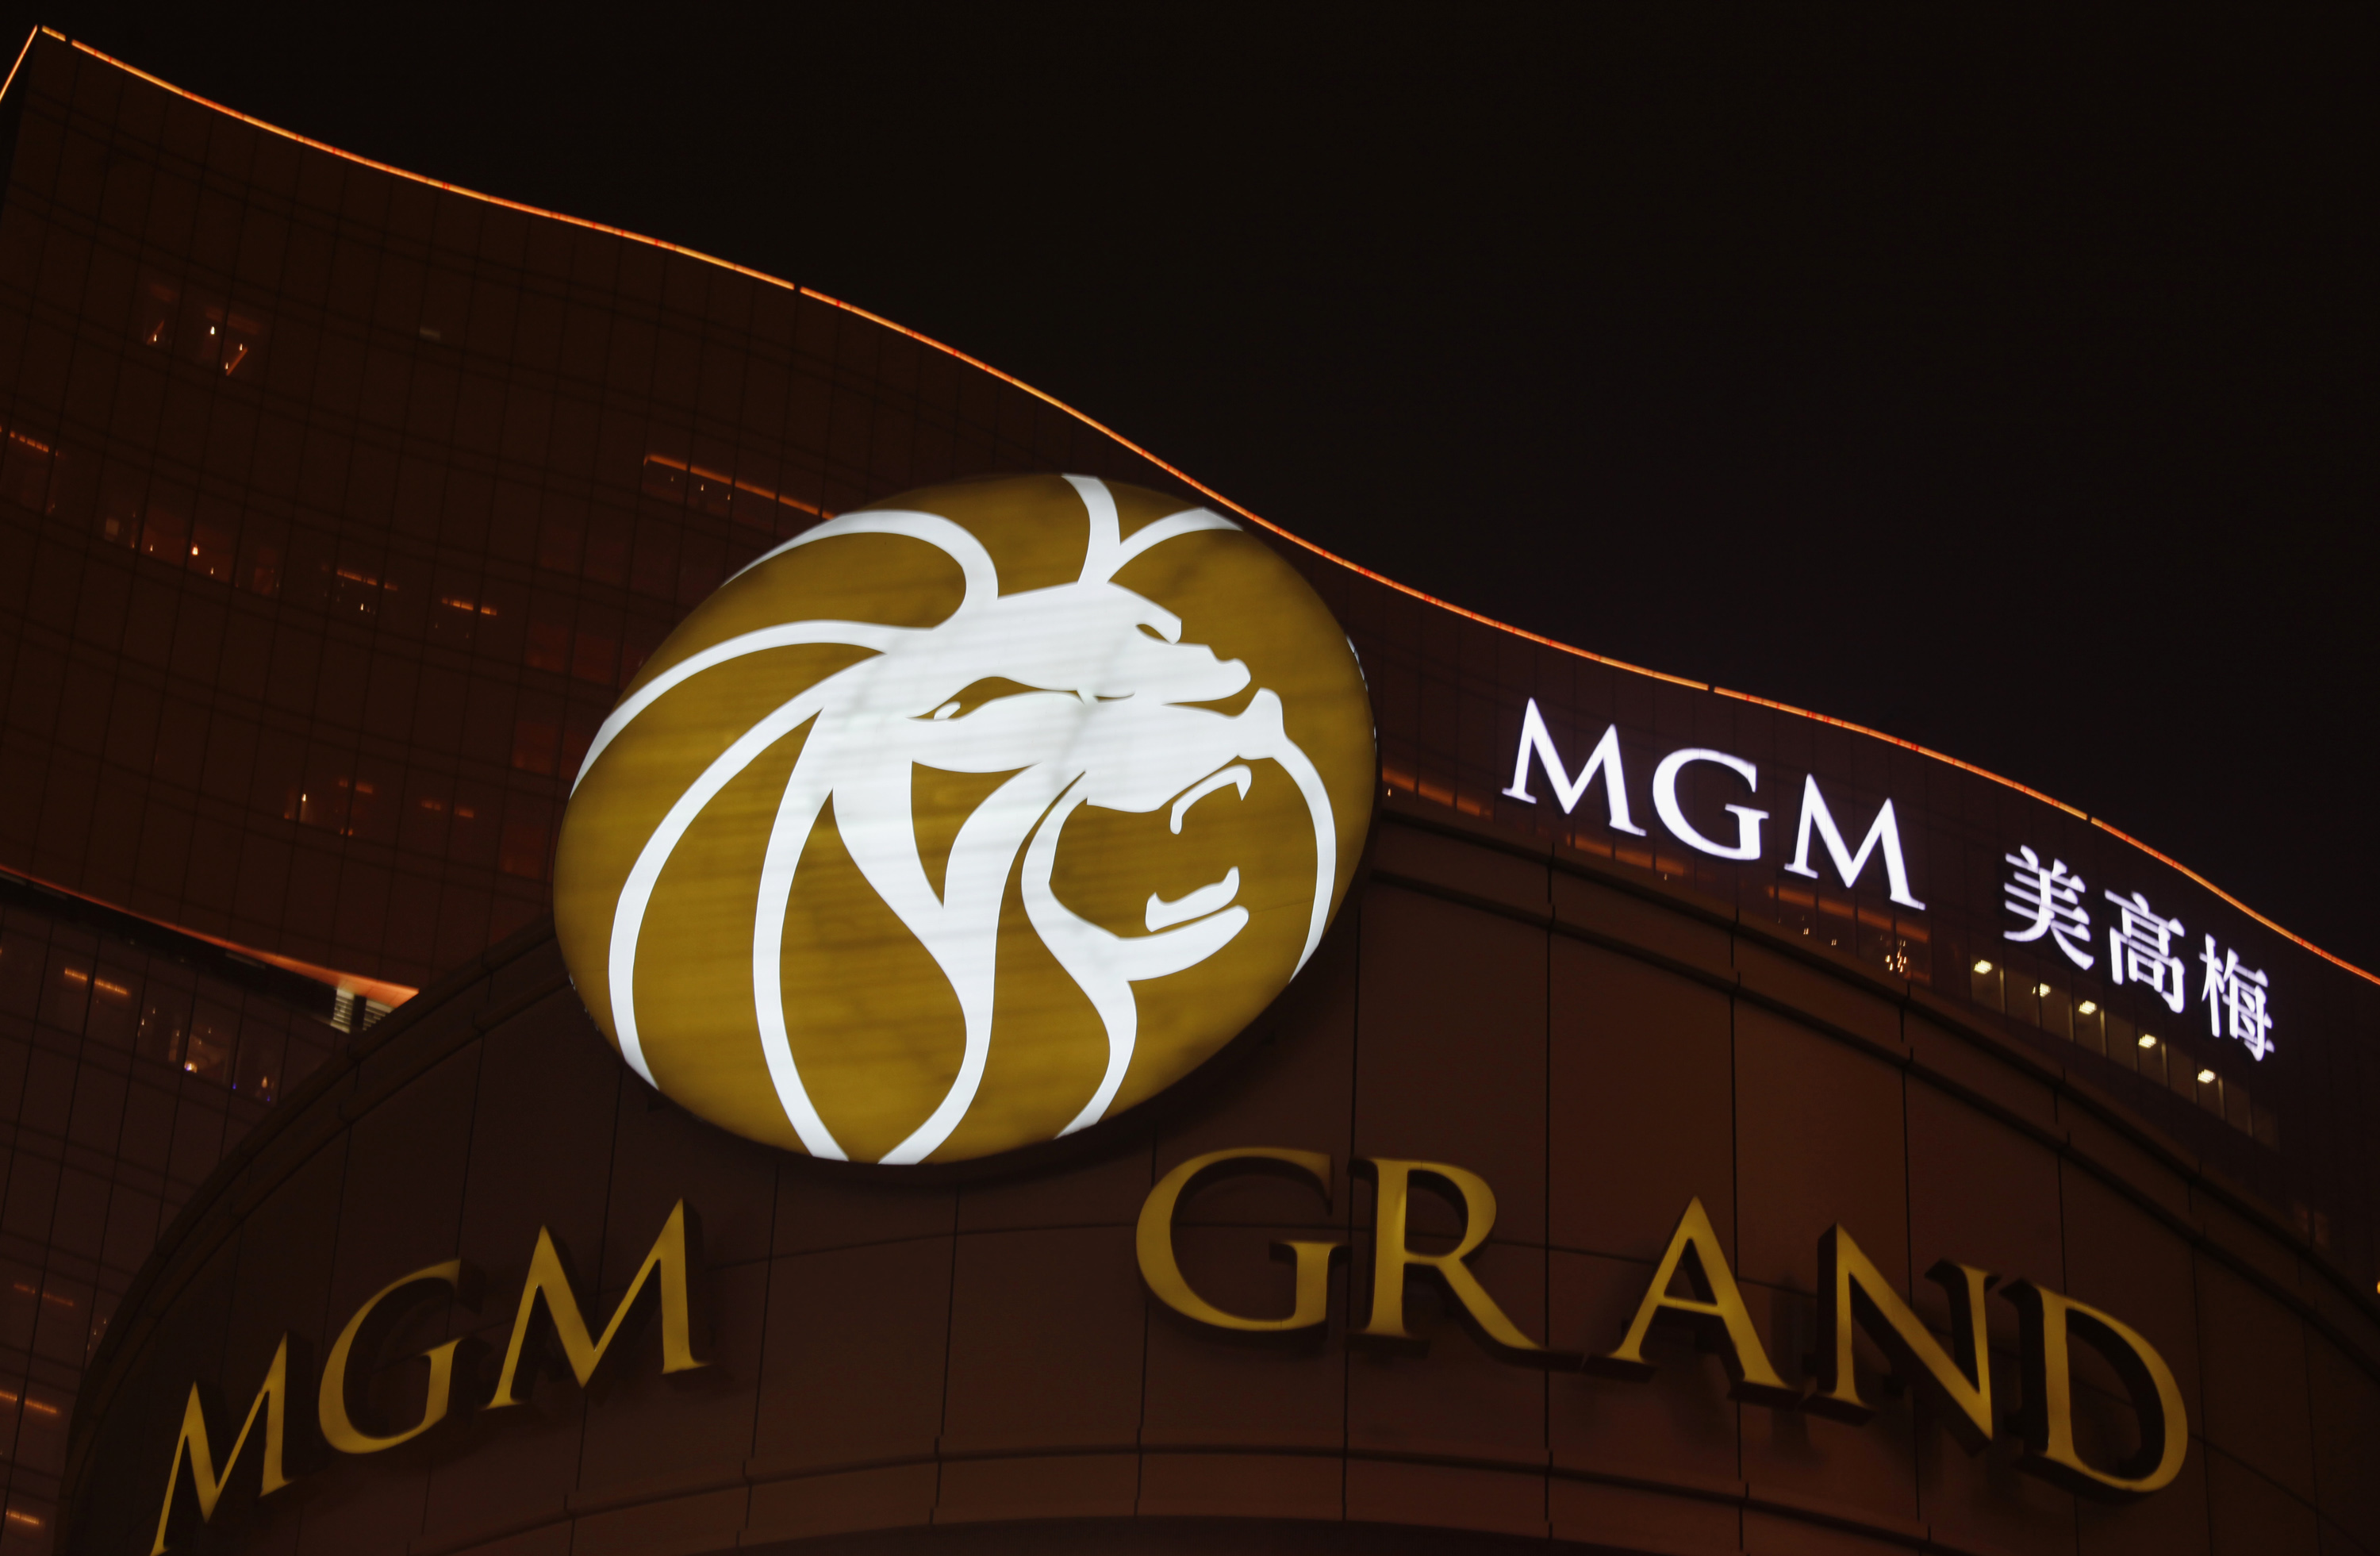 MGM Grand resort is lit up in the evening in Macau